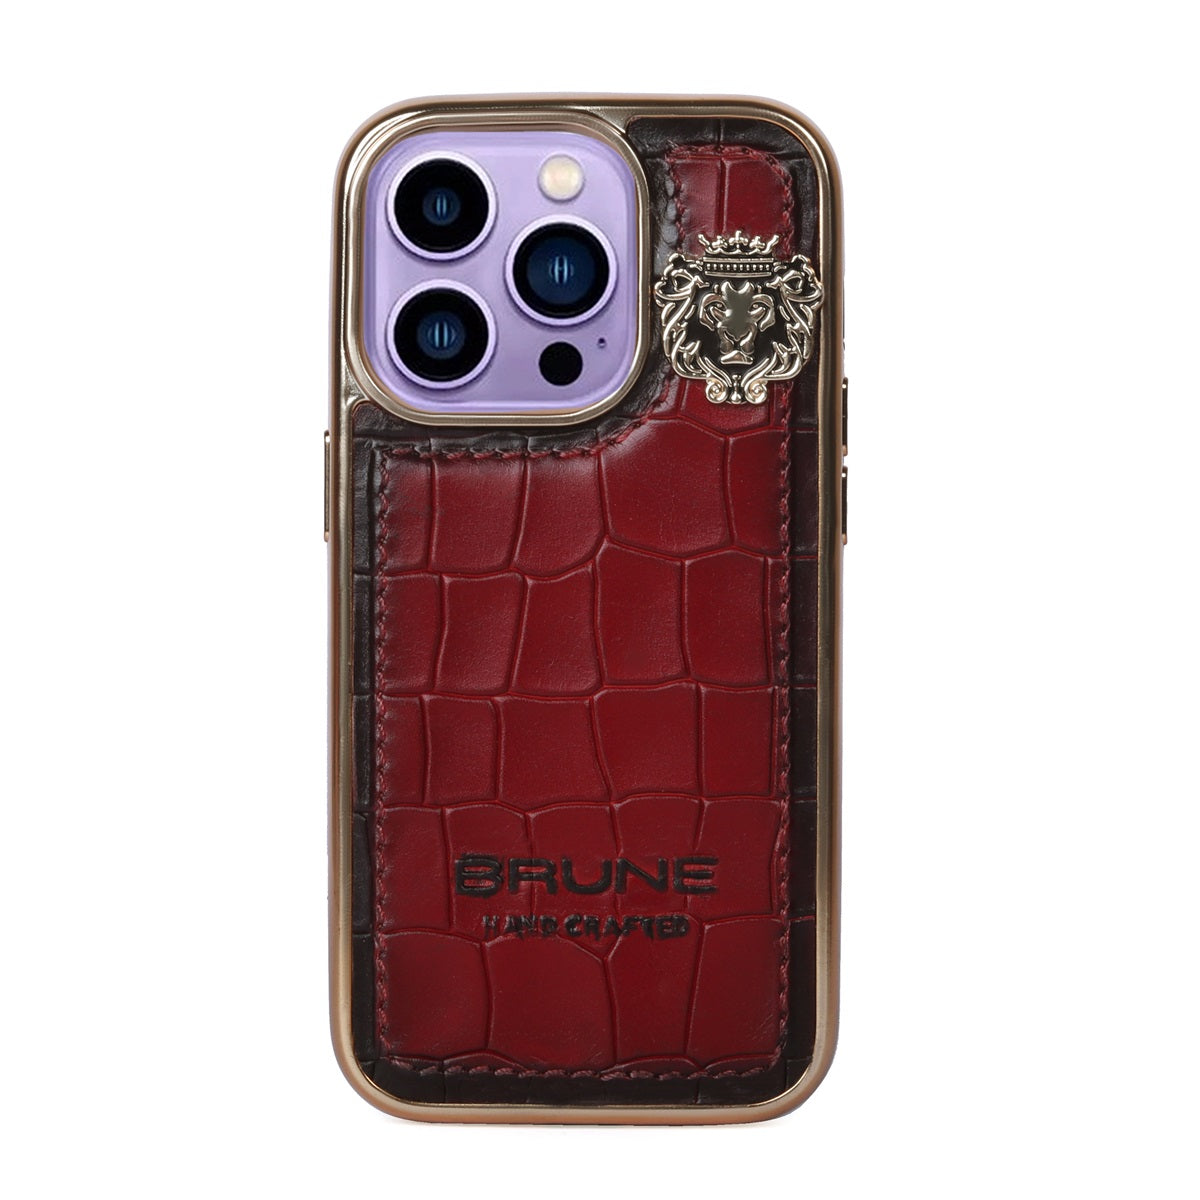 Wine Leather Mobile Cover with Golden Rim Croco Textured Metal Lion Logo by Brune & Bareskin